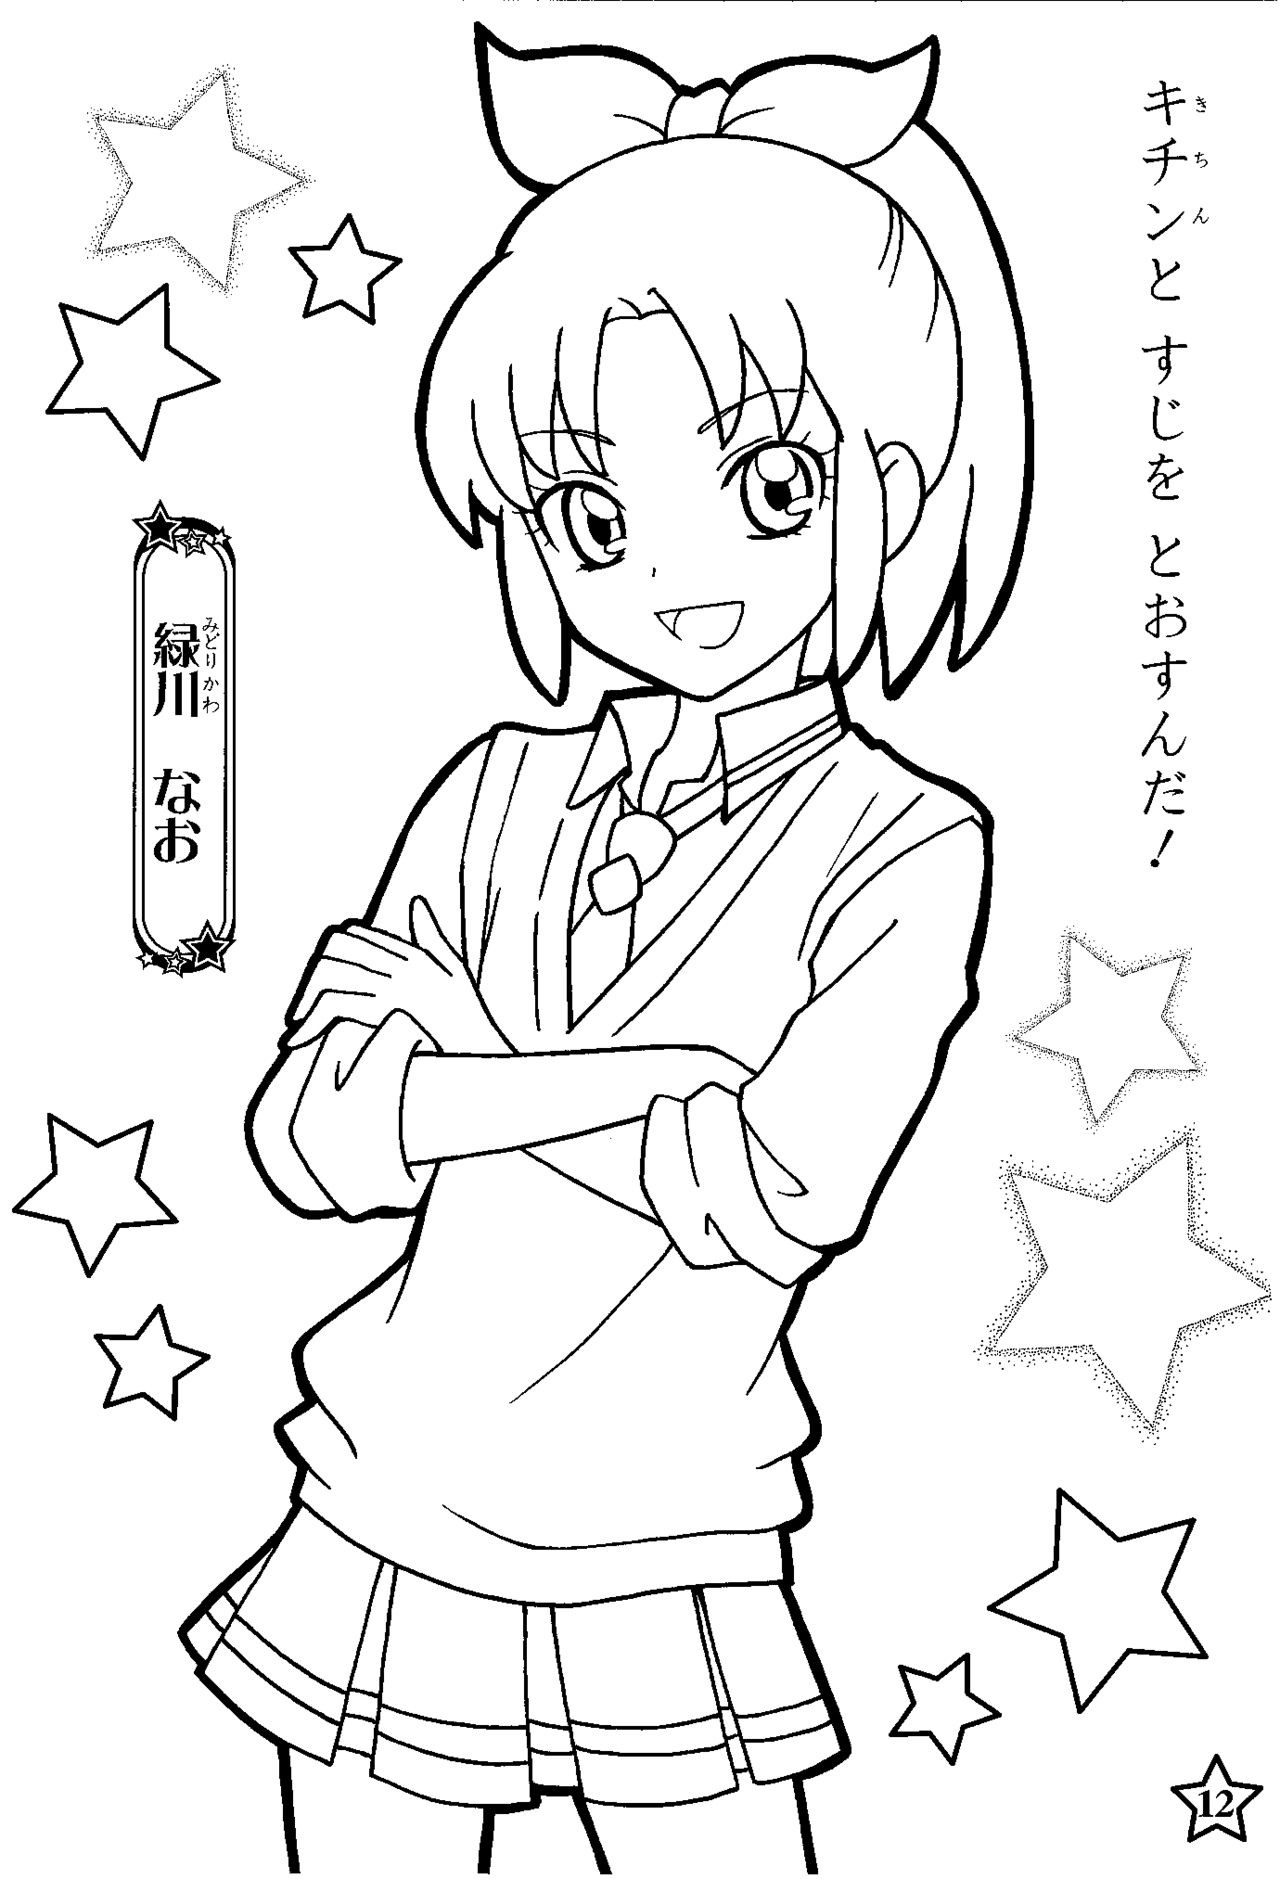 Coloring Pages For Girls Anime
 Creative Anime Colouring Pages Gallery s Urakan